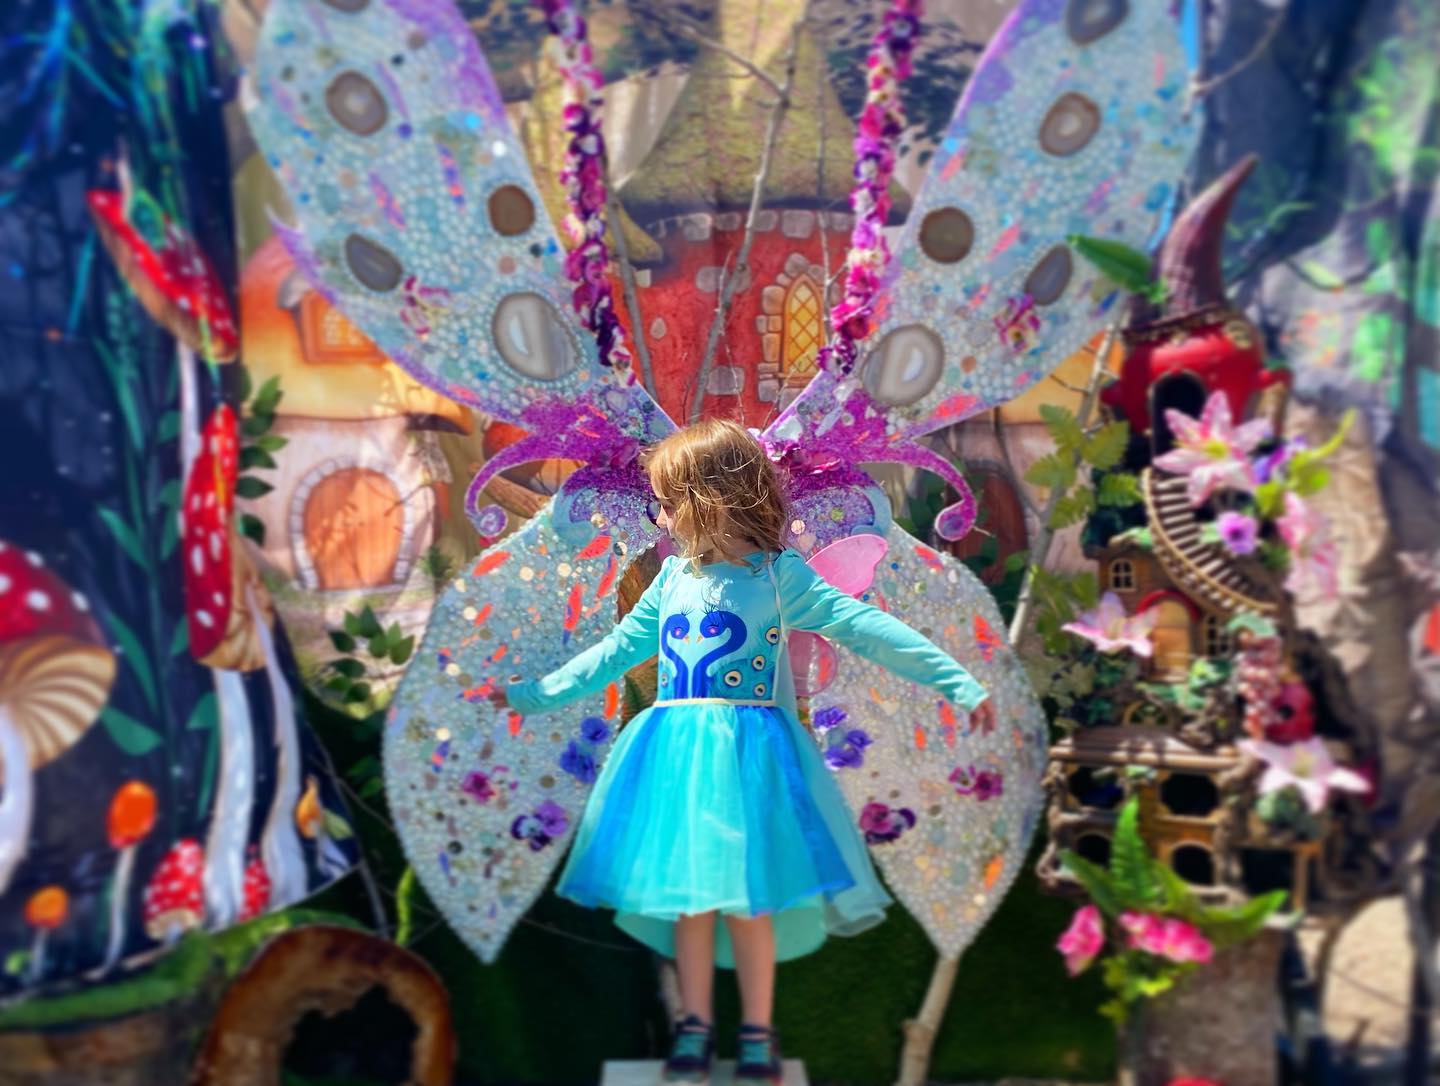 A small girl in a blue dress poses in front of an elaborate and colourful fairy wing display, giving the effect that she has wings.